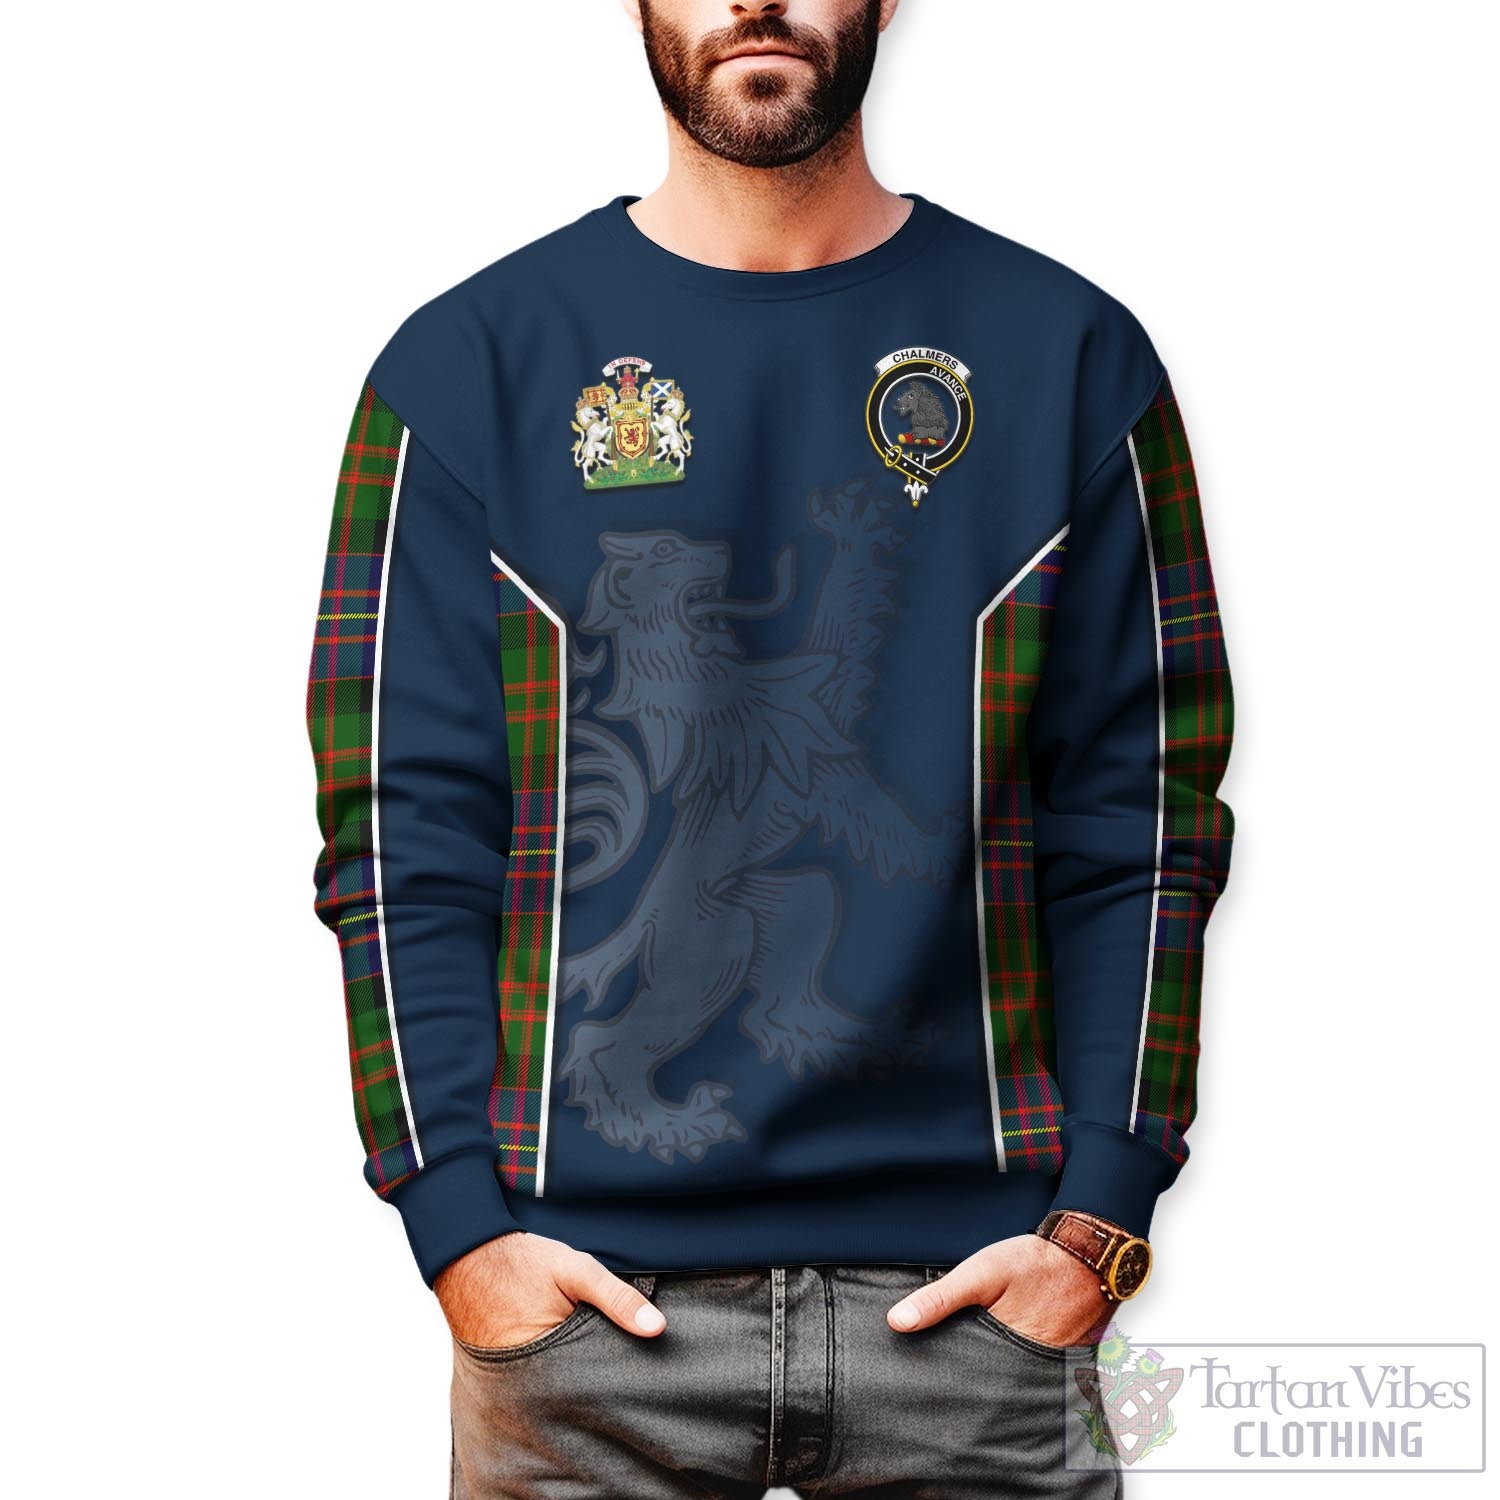 Tartan Vibes Clothing Chalmers Modern Tartan Sweater with Family Crest and Lion Rampant Vibes Sport Style